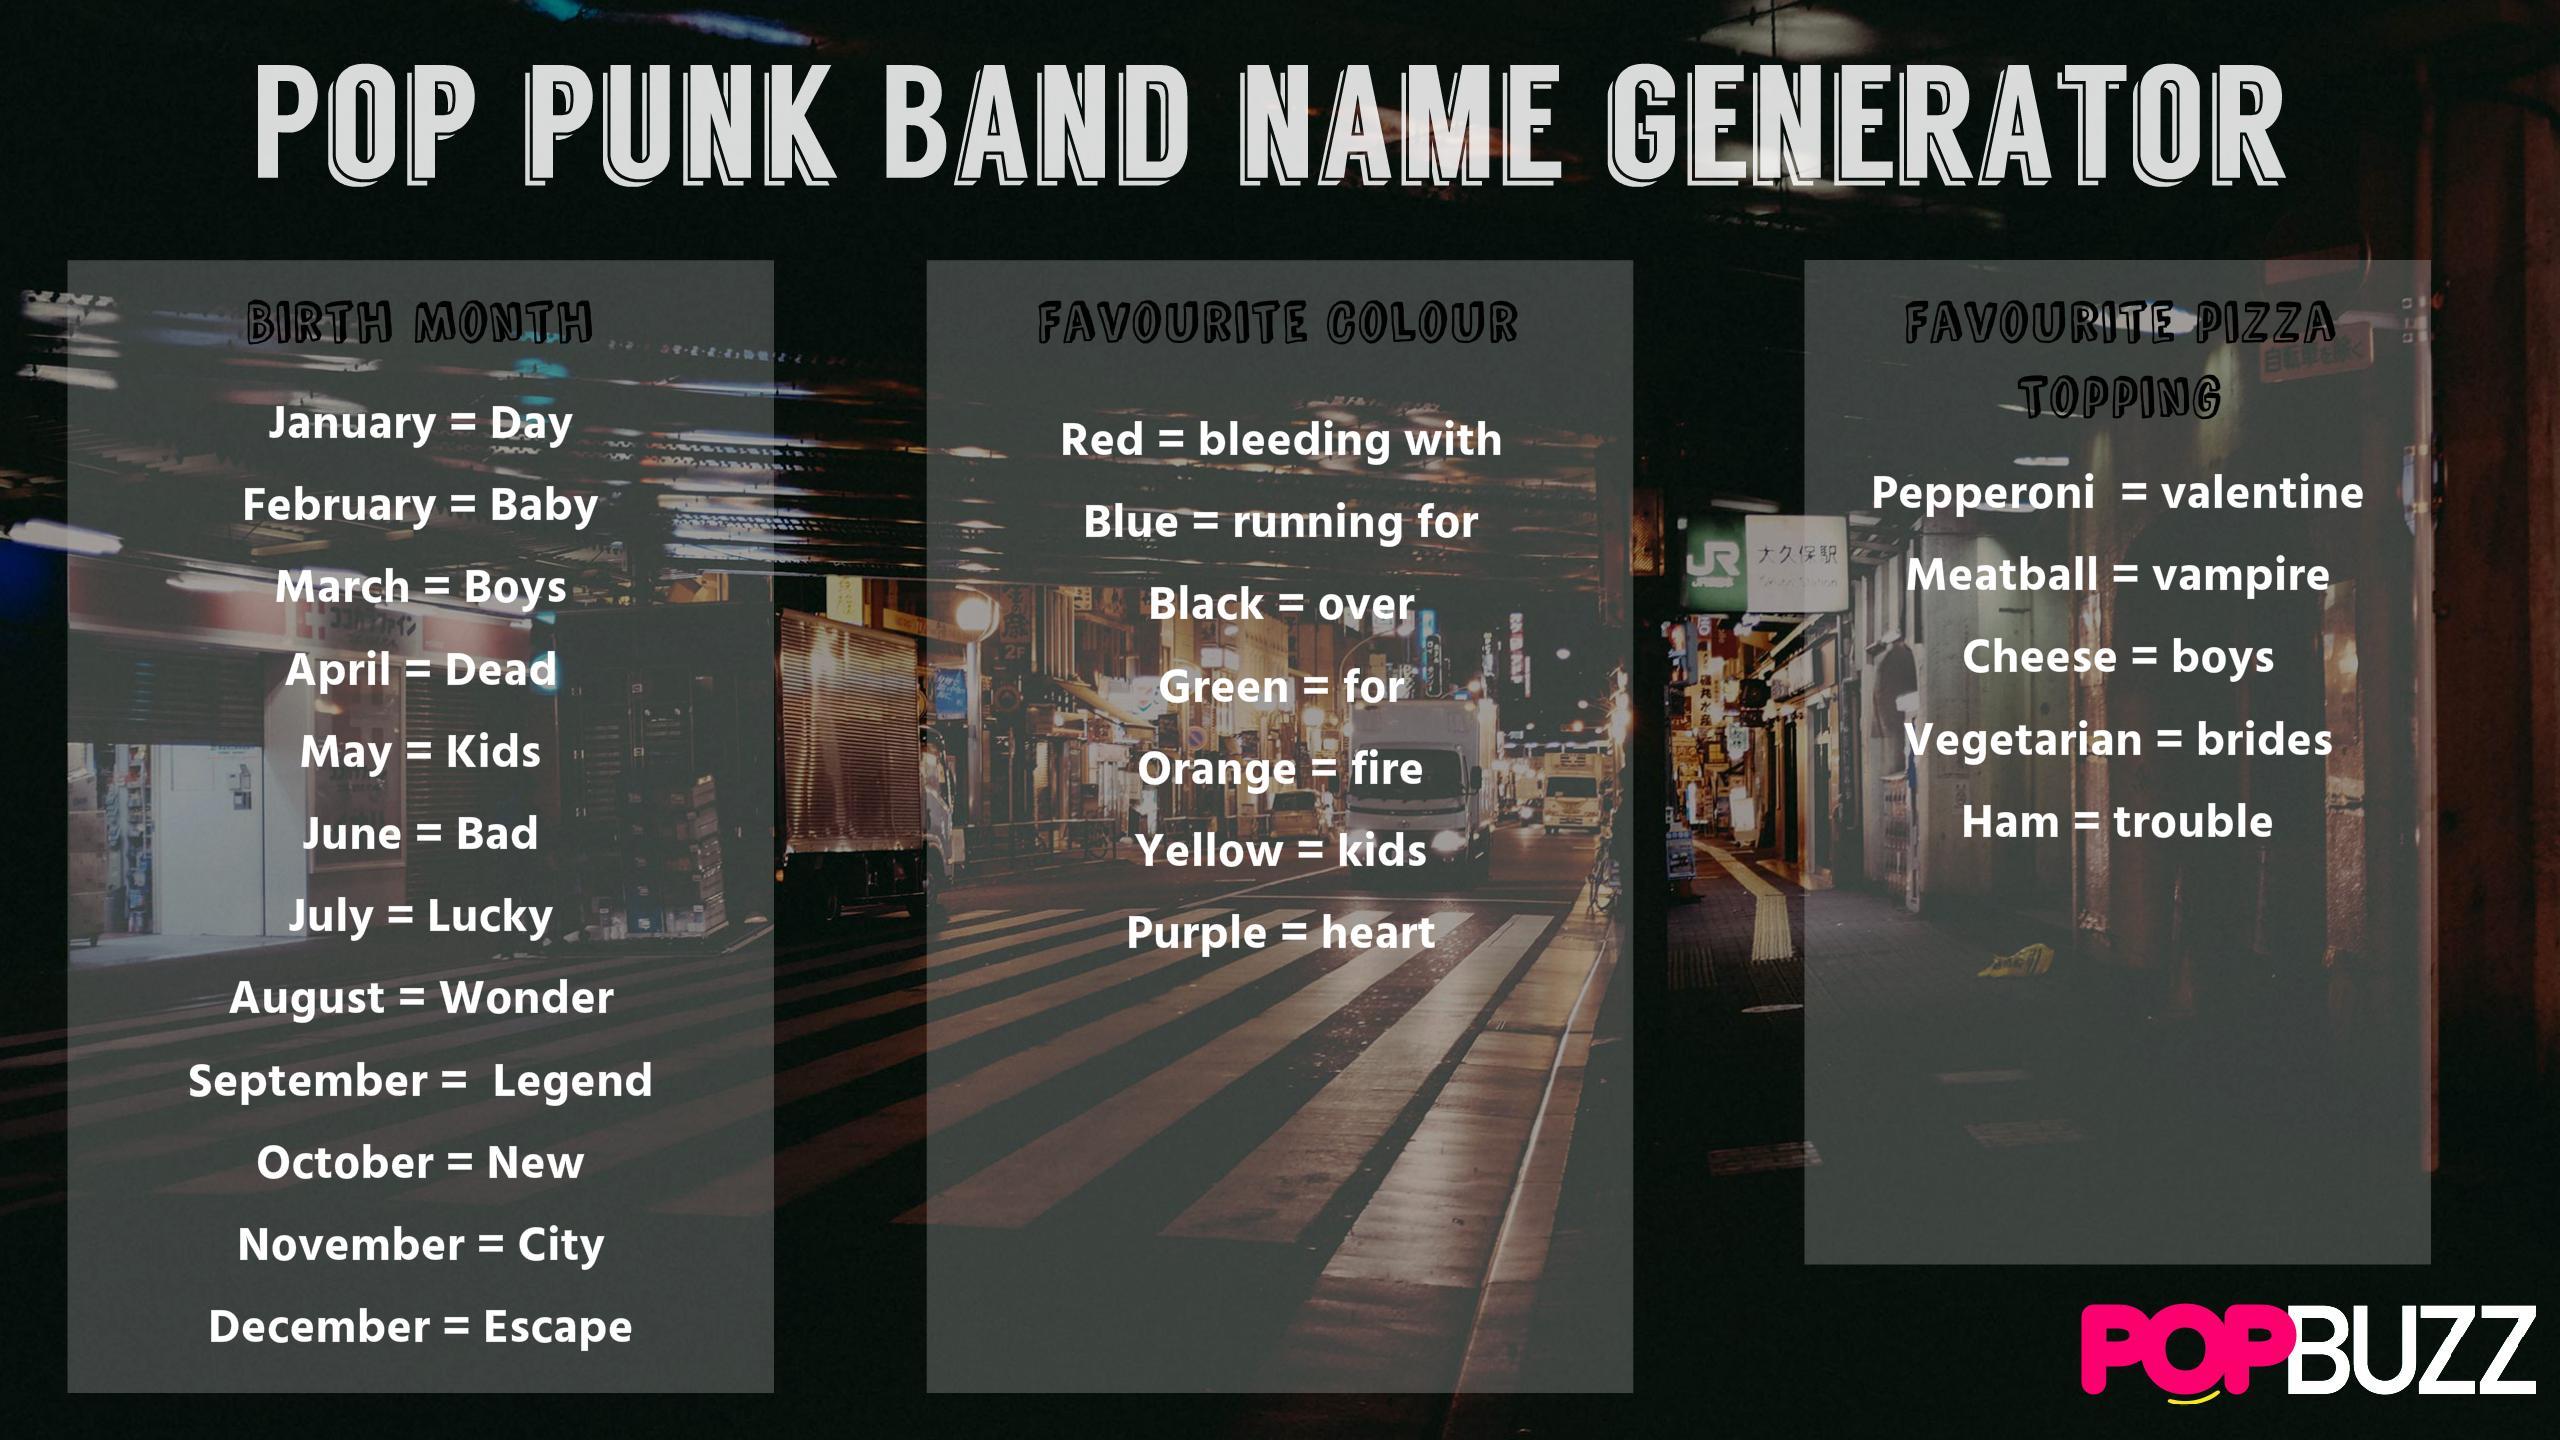 What Would You Name Your Pop Punk Band?